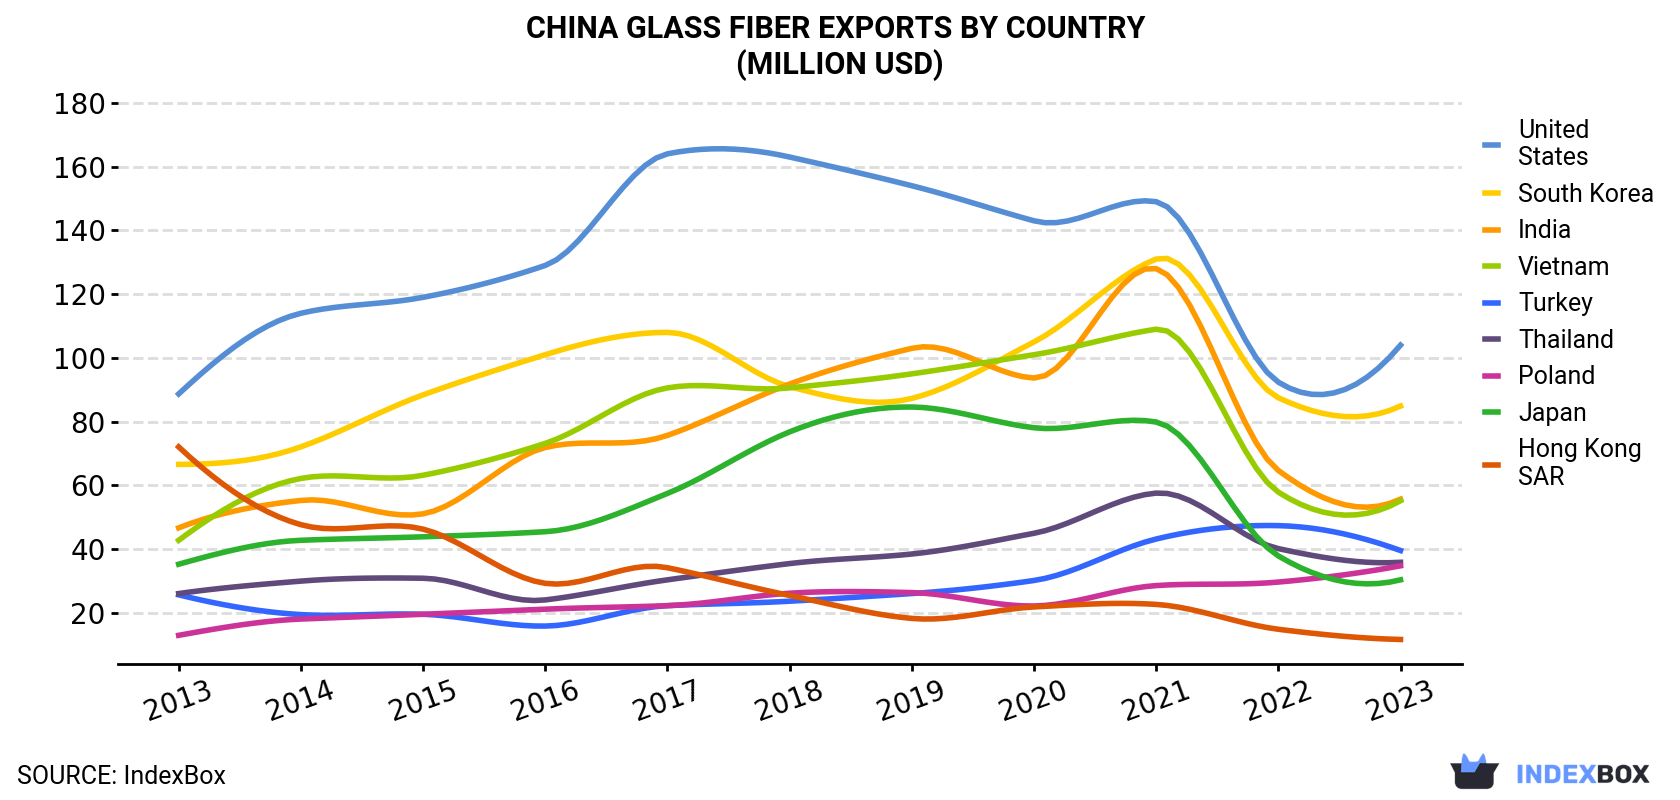 China Glass Fiber Exports By Country (Million USD)